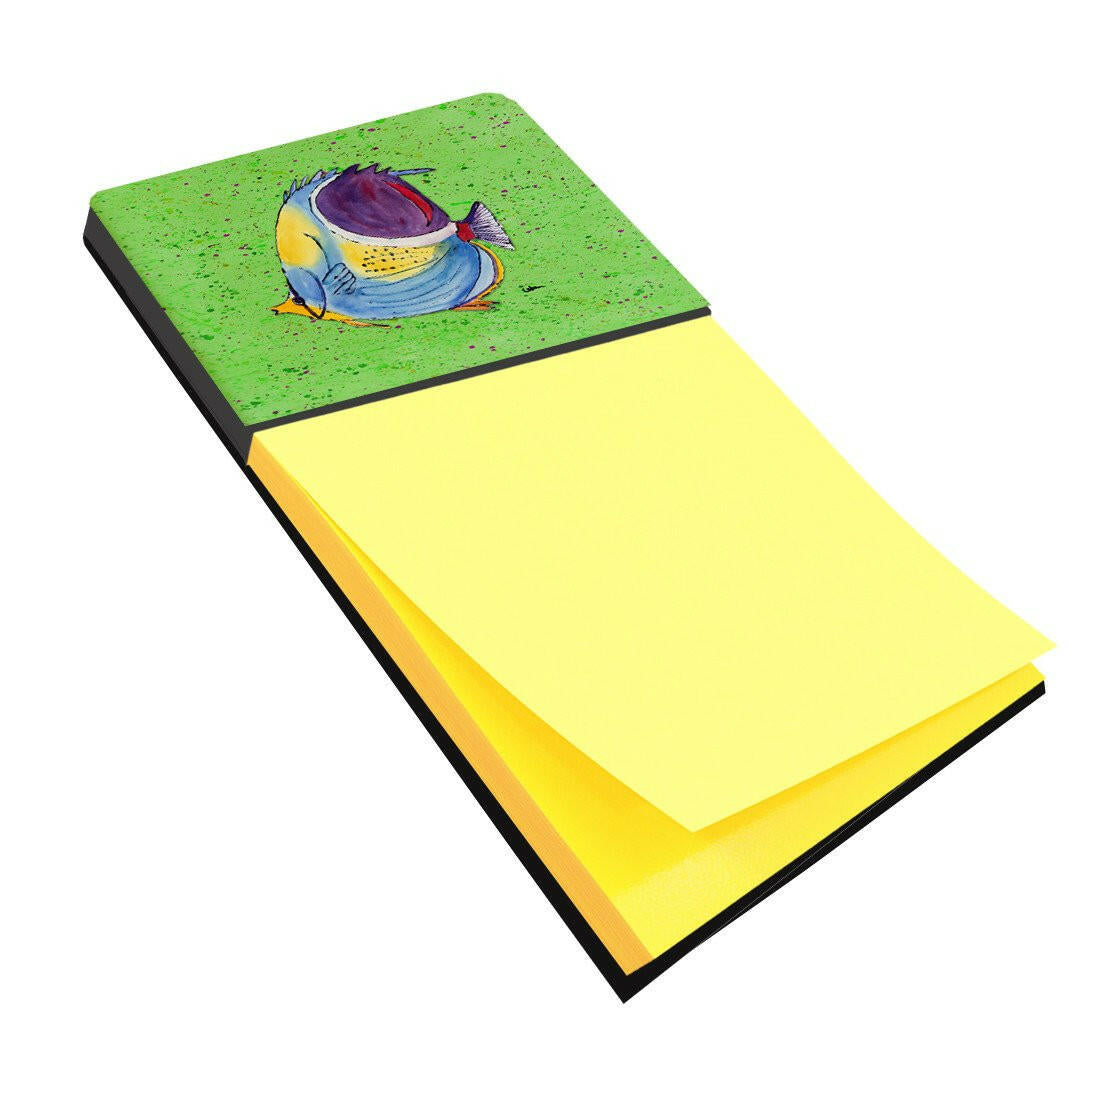 Tropical Fish on Green Refiillable Sticky Note Holder or Postit Note Dispenser 8574SN by Caroline's Treasures